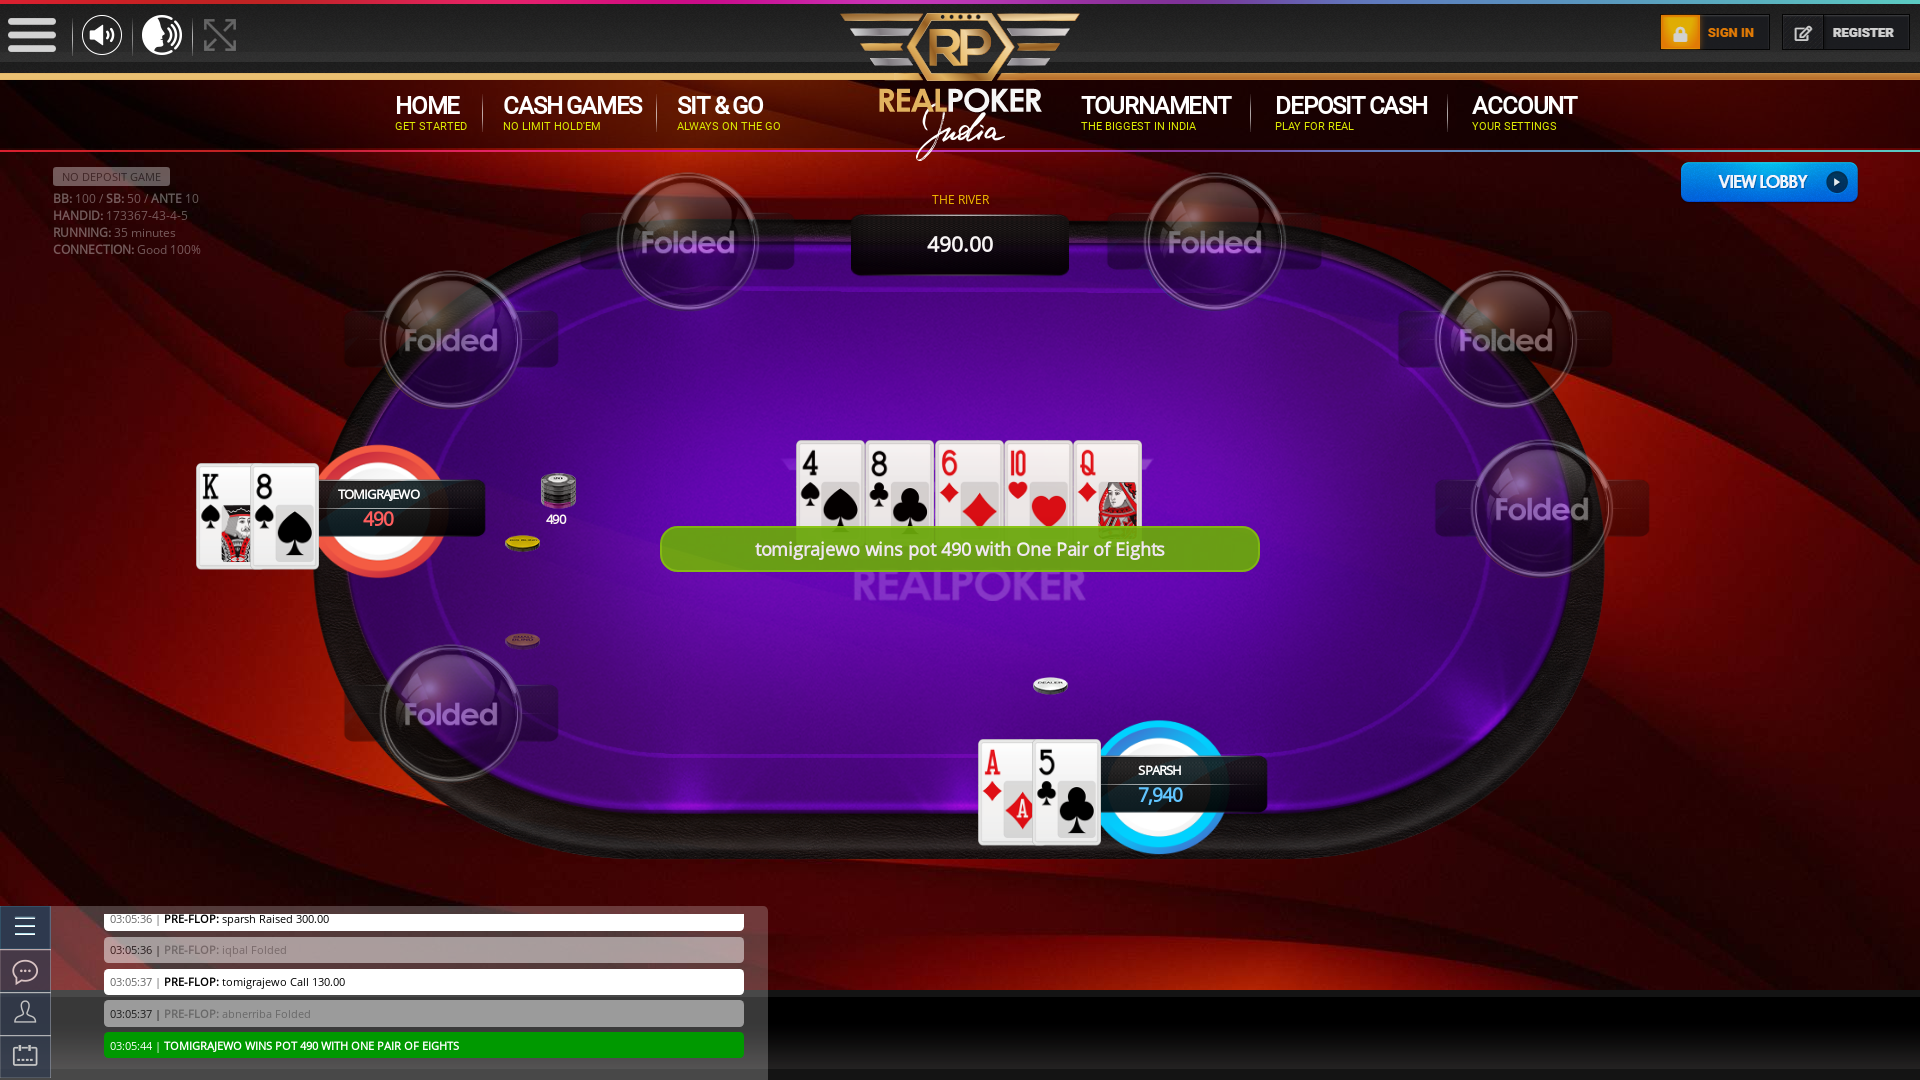 10 player texas holdem table at real poker with the table id 173367